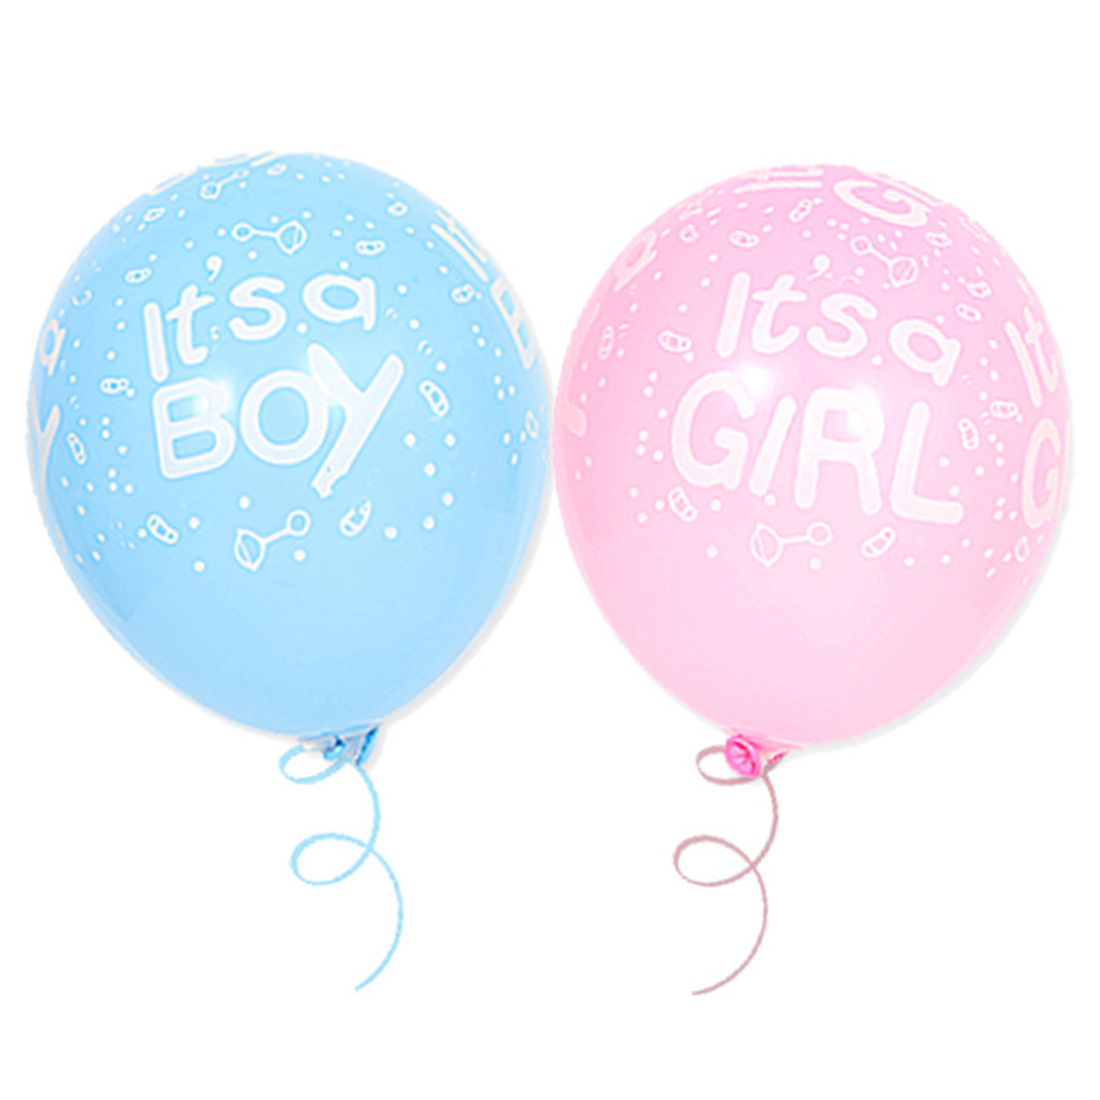 Baby shower decoration items BOY OR GIRL...